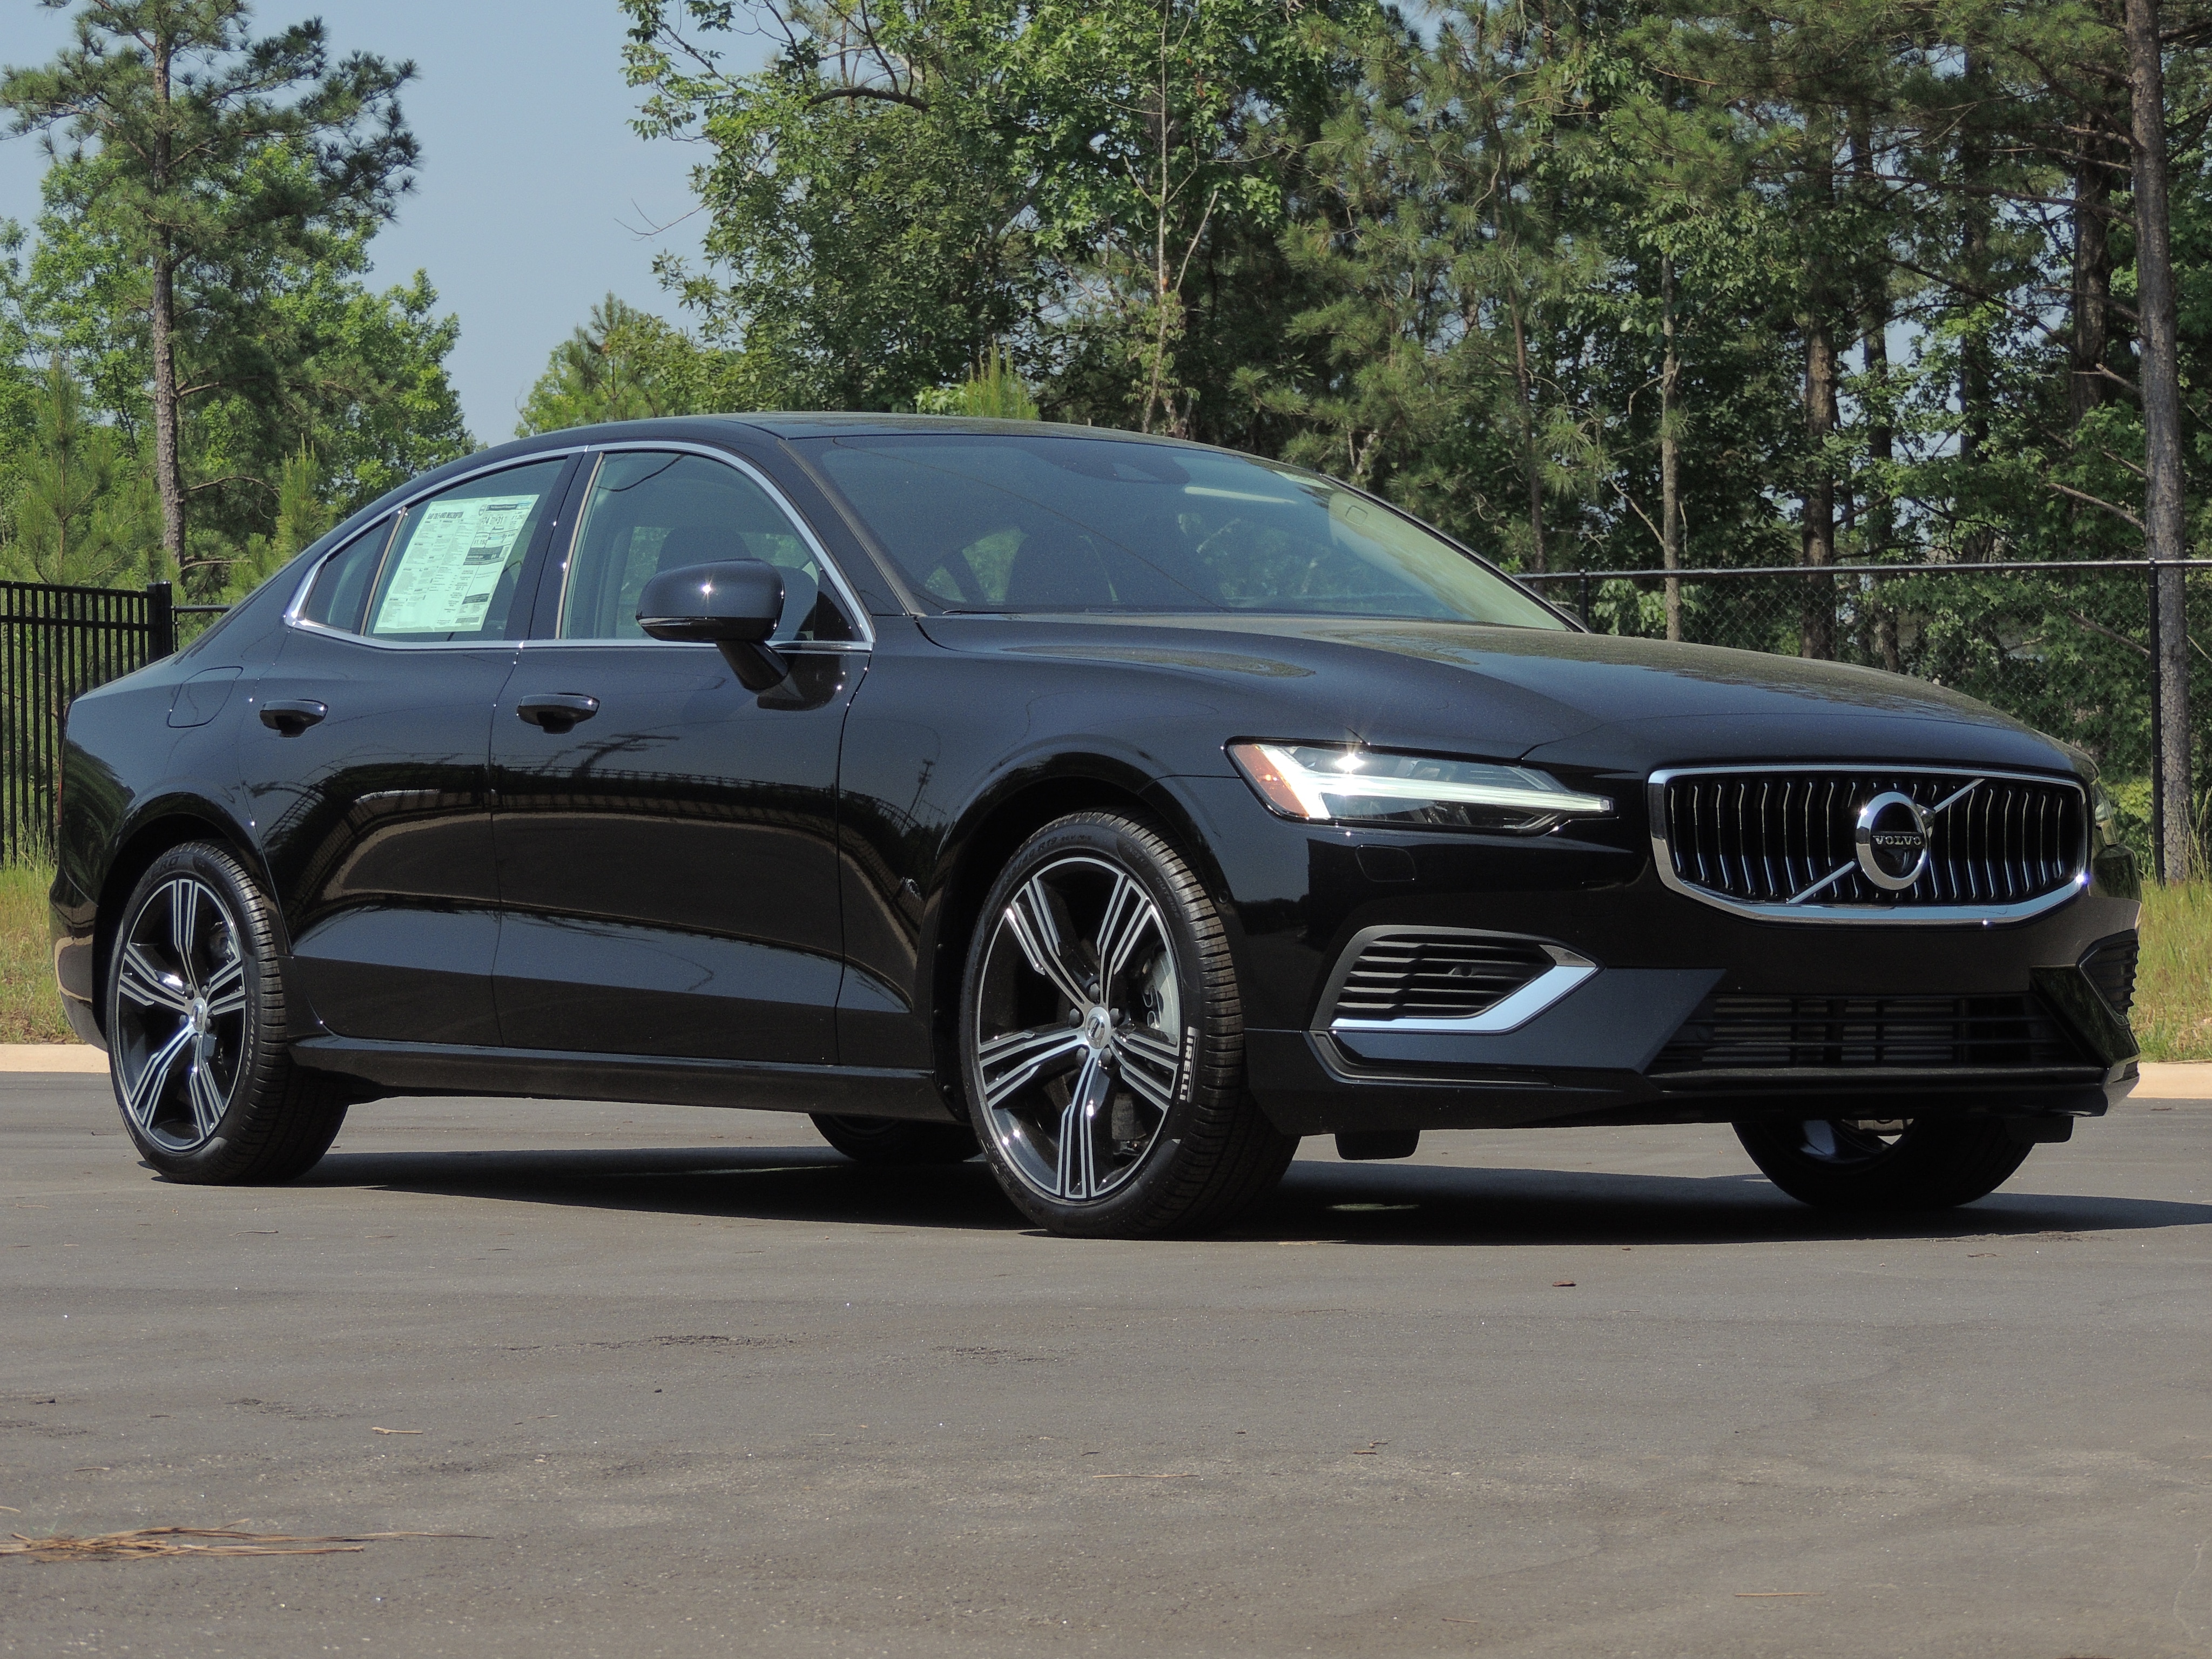 2019 Volvo S60 Hybrid For Sale in Cary NC | Volvo Cars of Cary